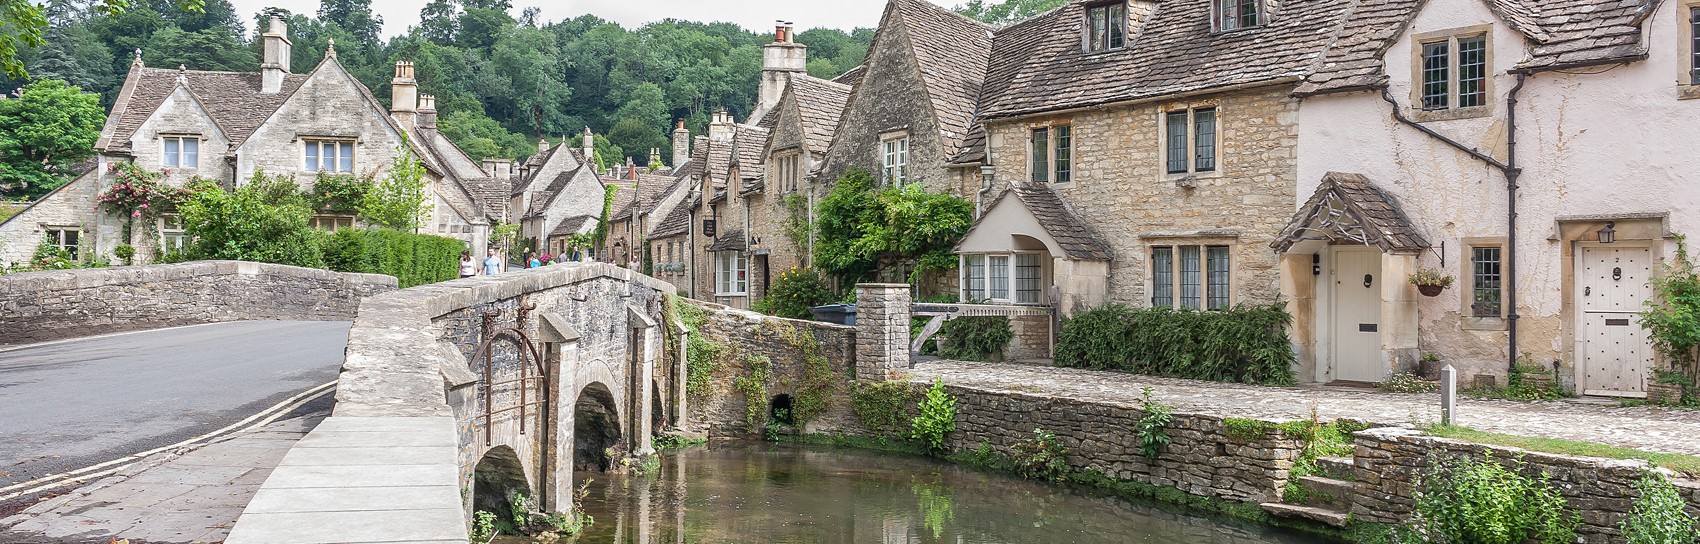 Castle Combe in The Cotswolds. Photograph by GRAHAM CUSTANCE